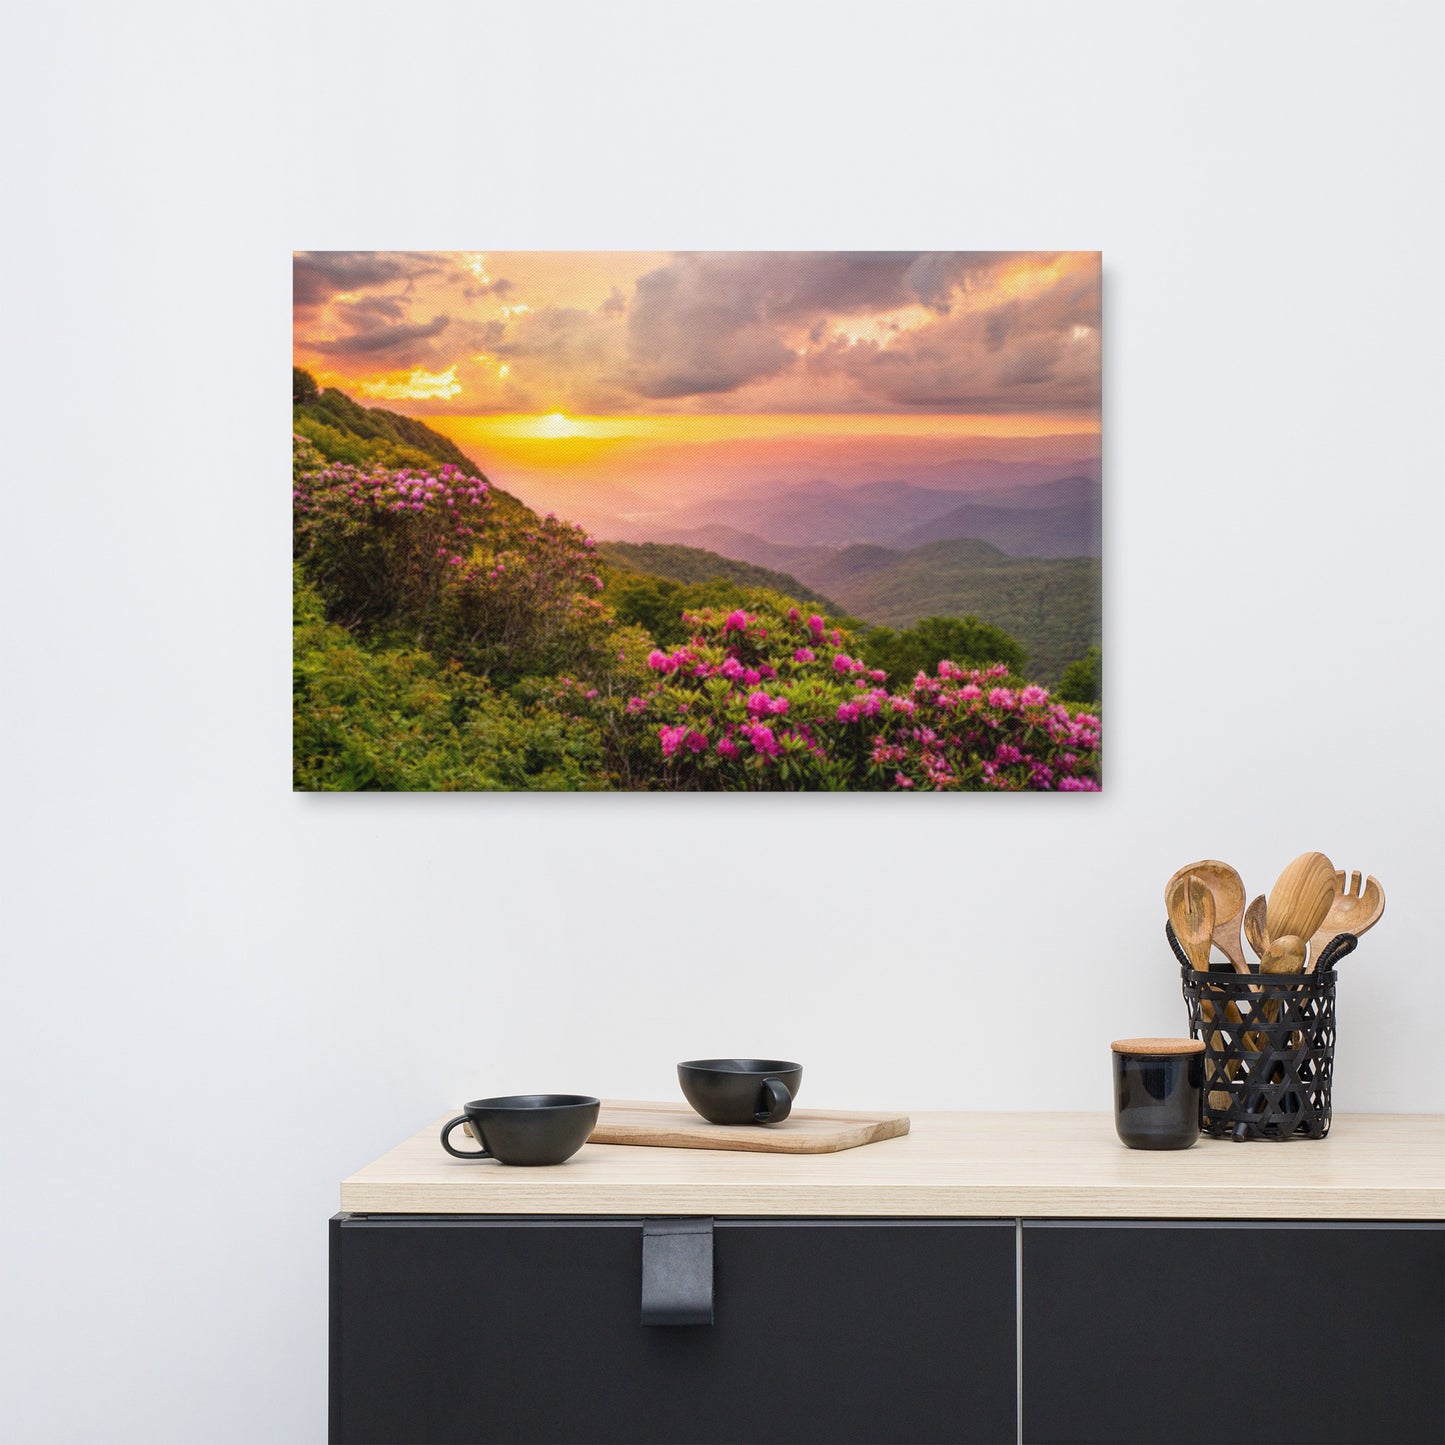 Master Bedroom Above Bed Decor: Close of the Day - Appalachian Mountains Sunset - Floral / Botanical / Rustic Landscape Photograph Asheville North Carolina Blue Ridge Parkway